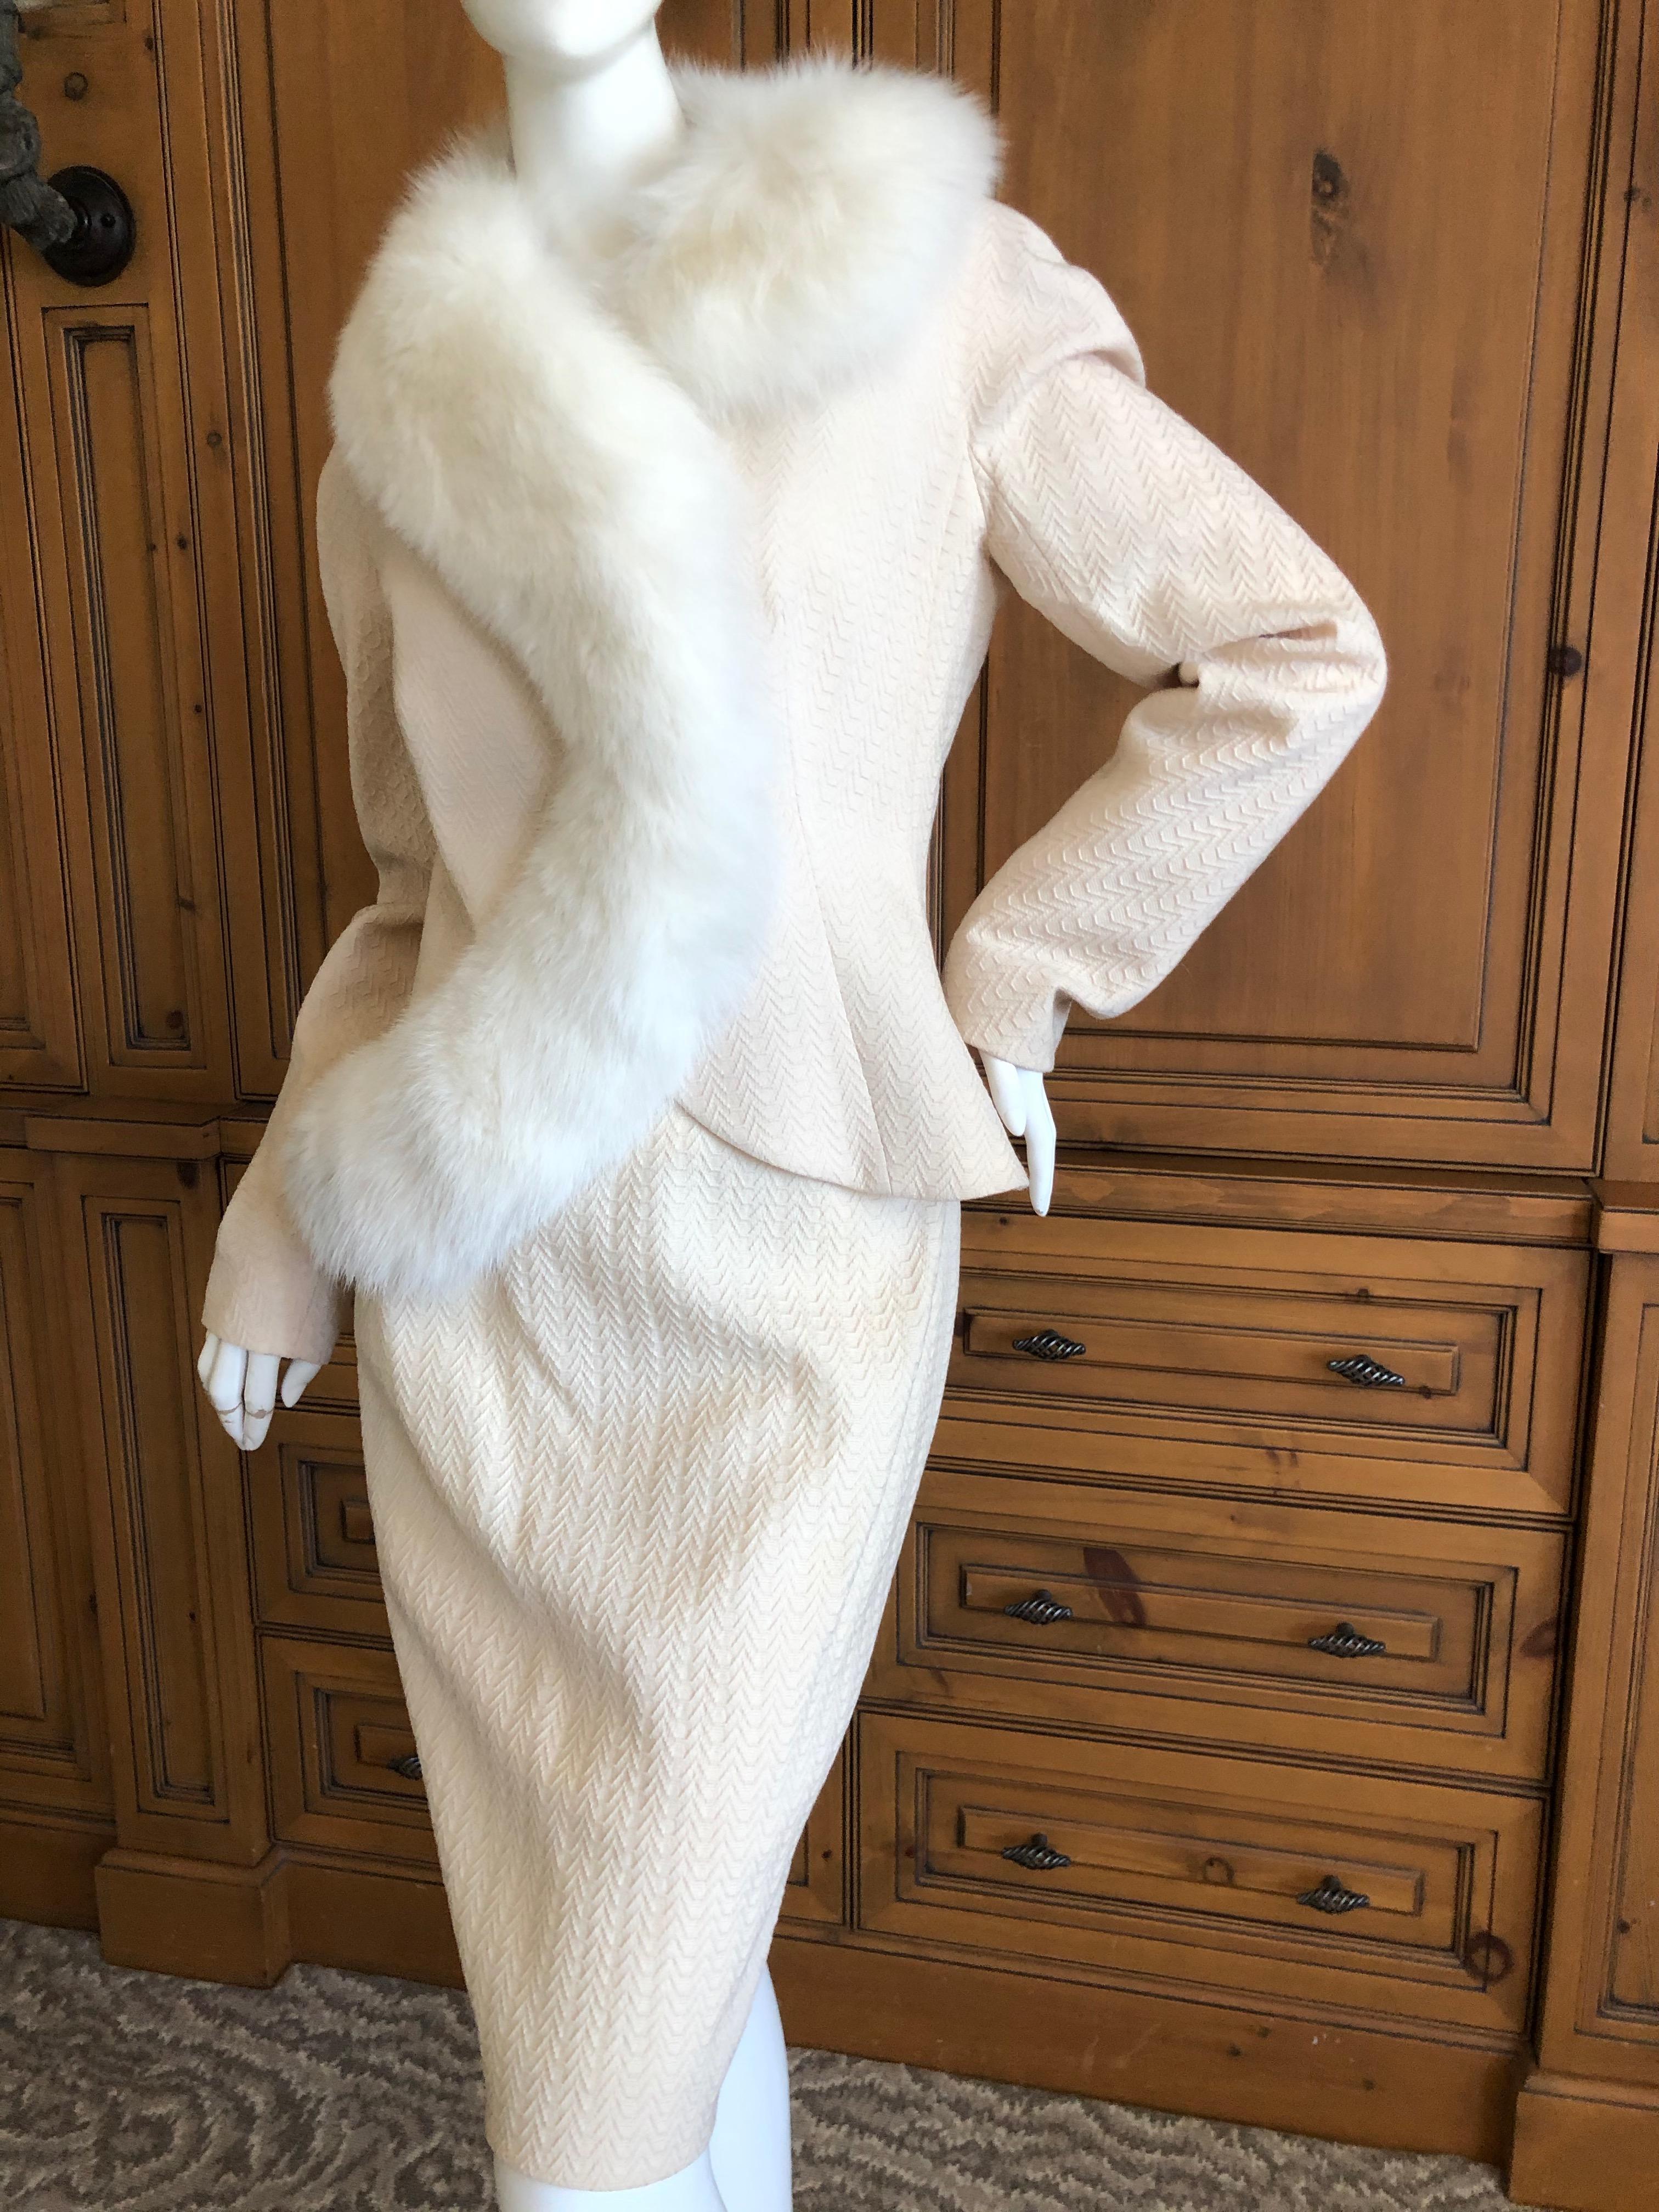  Christian Dior AW '97 by John Galliano Vintage Fox Fur Trim Jacket & Skirt Suit For Sale 2